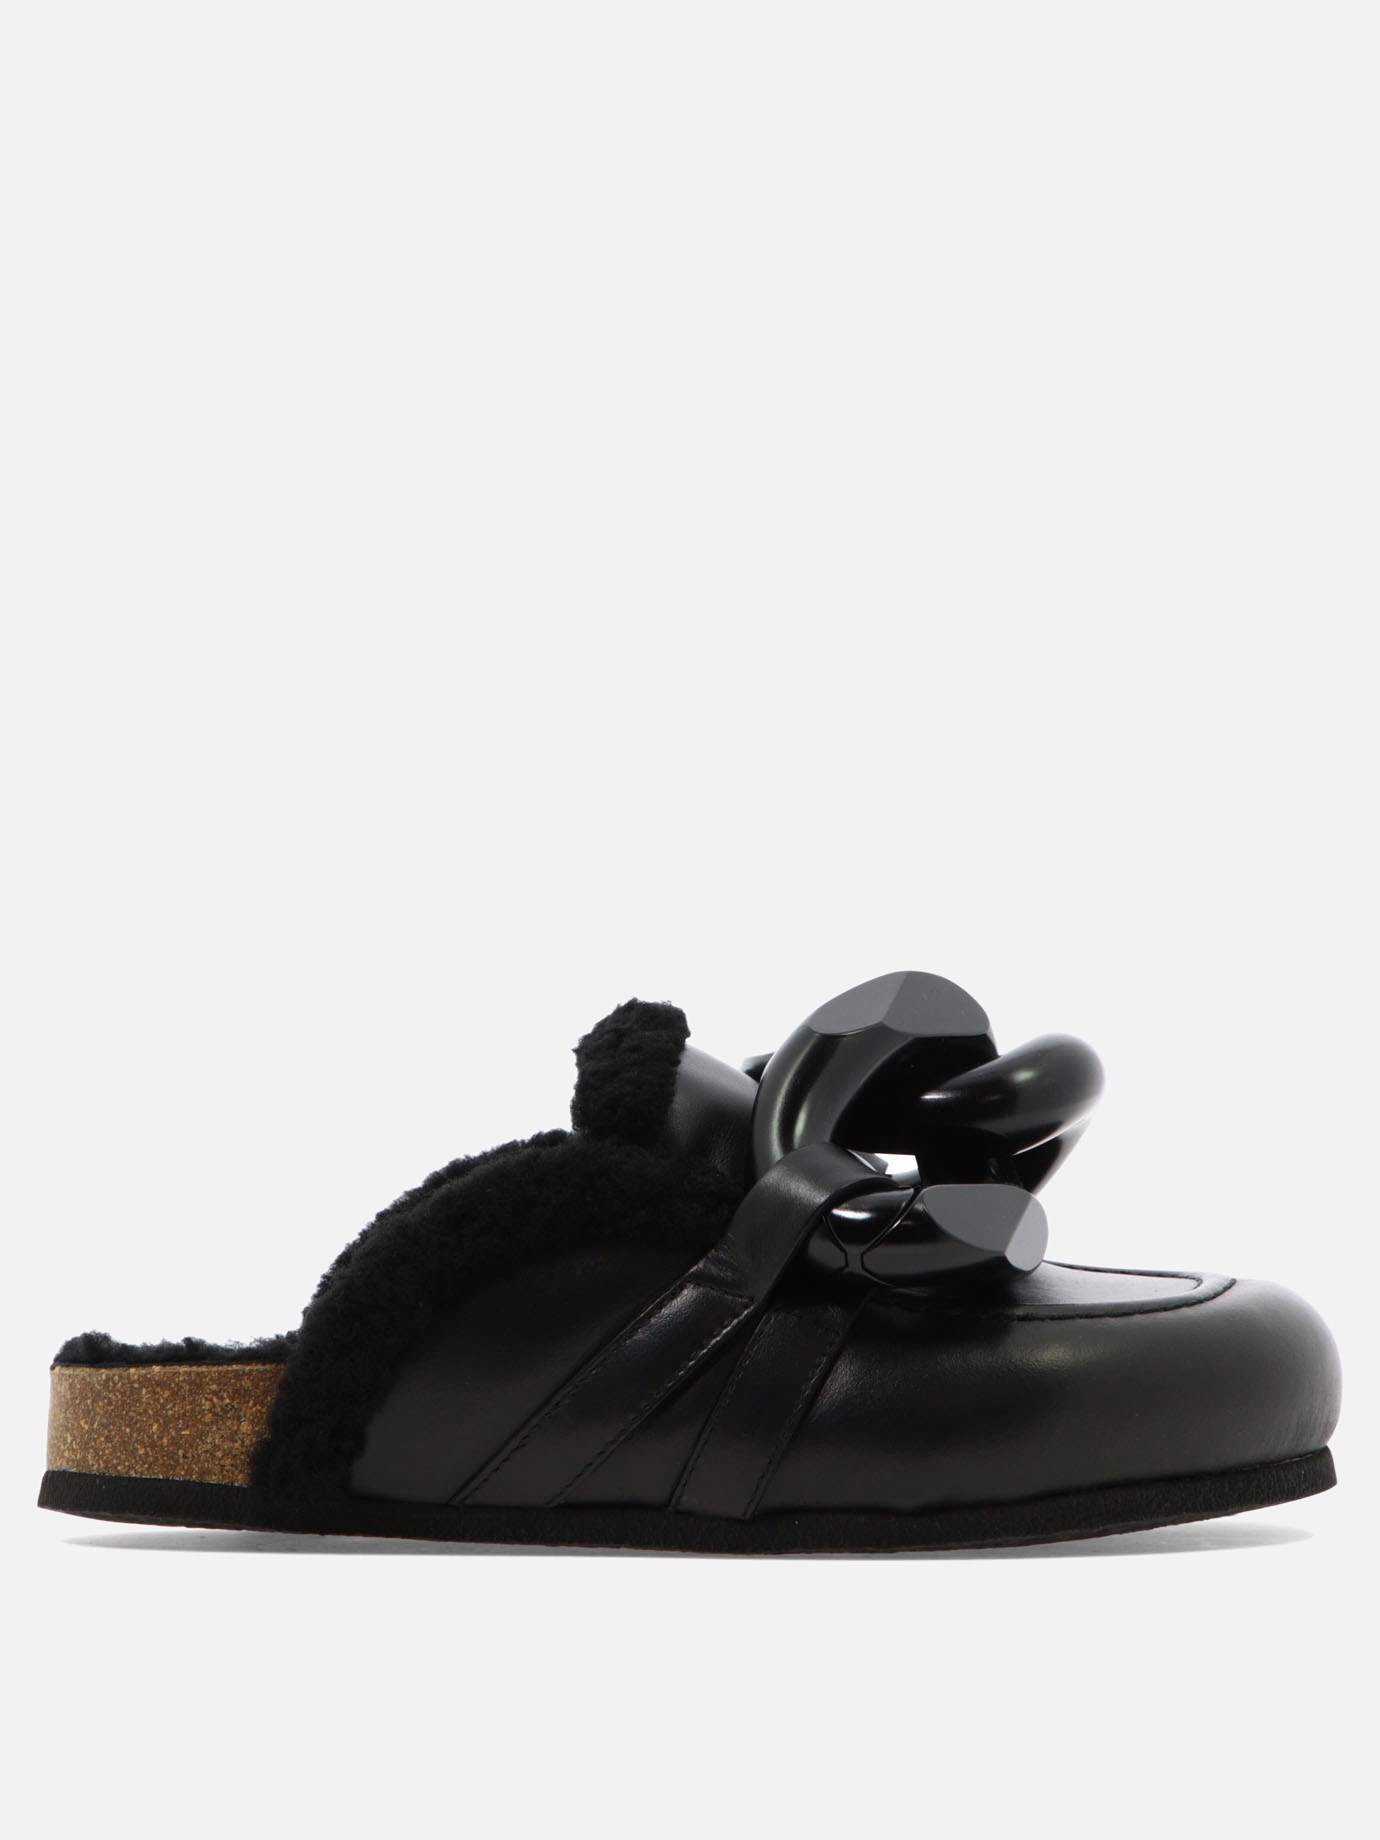  Chain  slippersby JW Anderson - 1